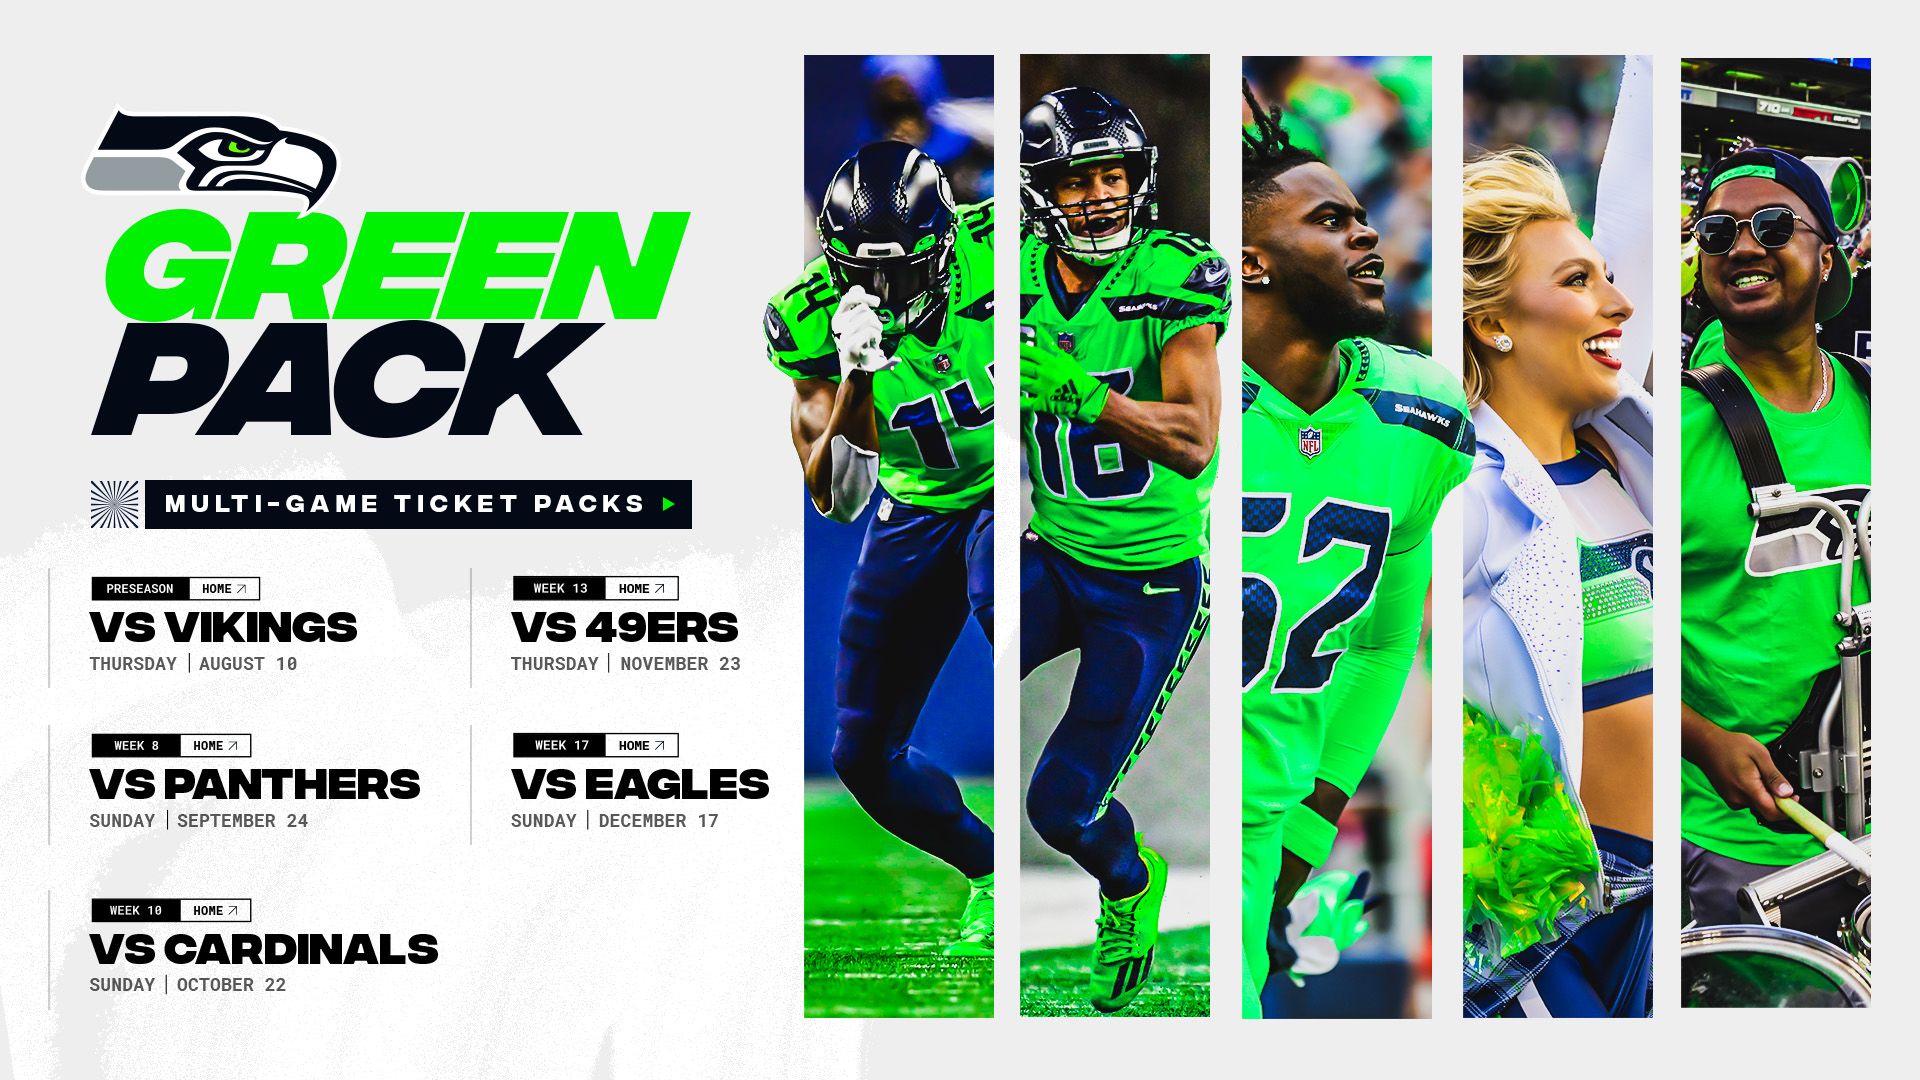 seahawks game tickets